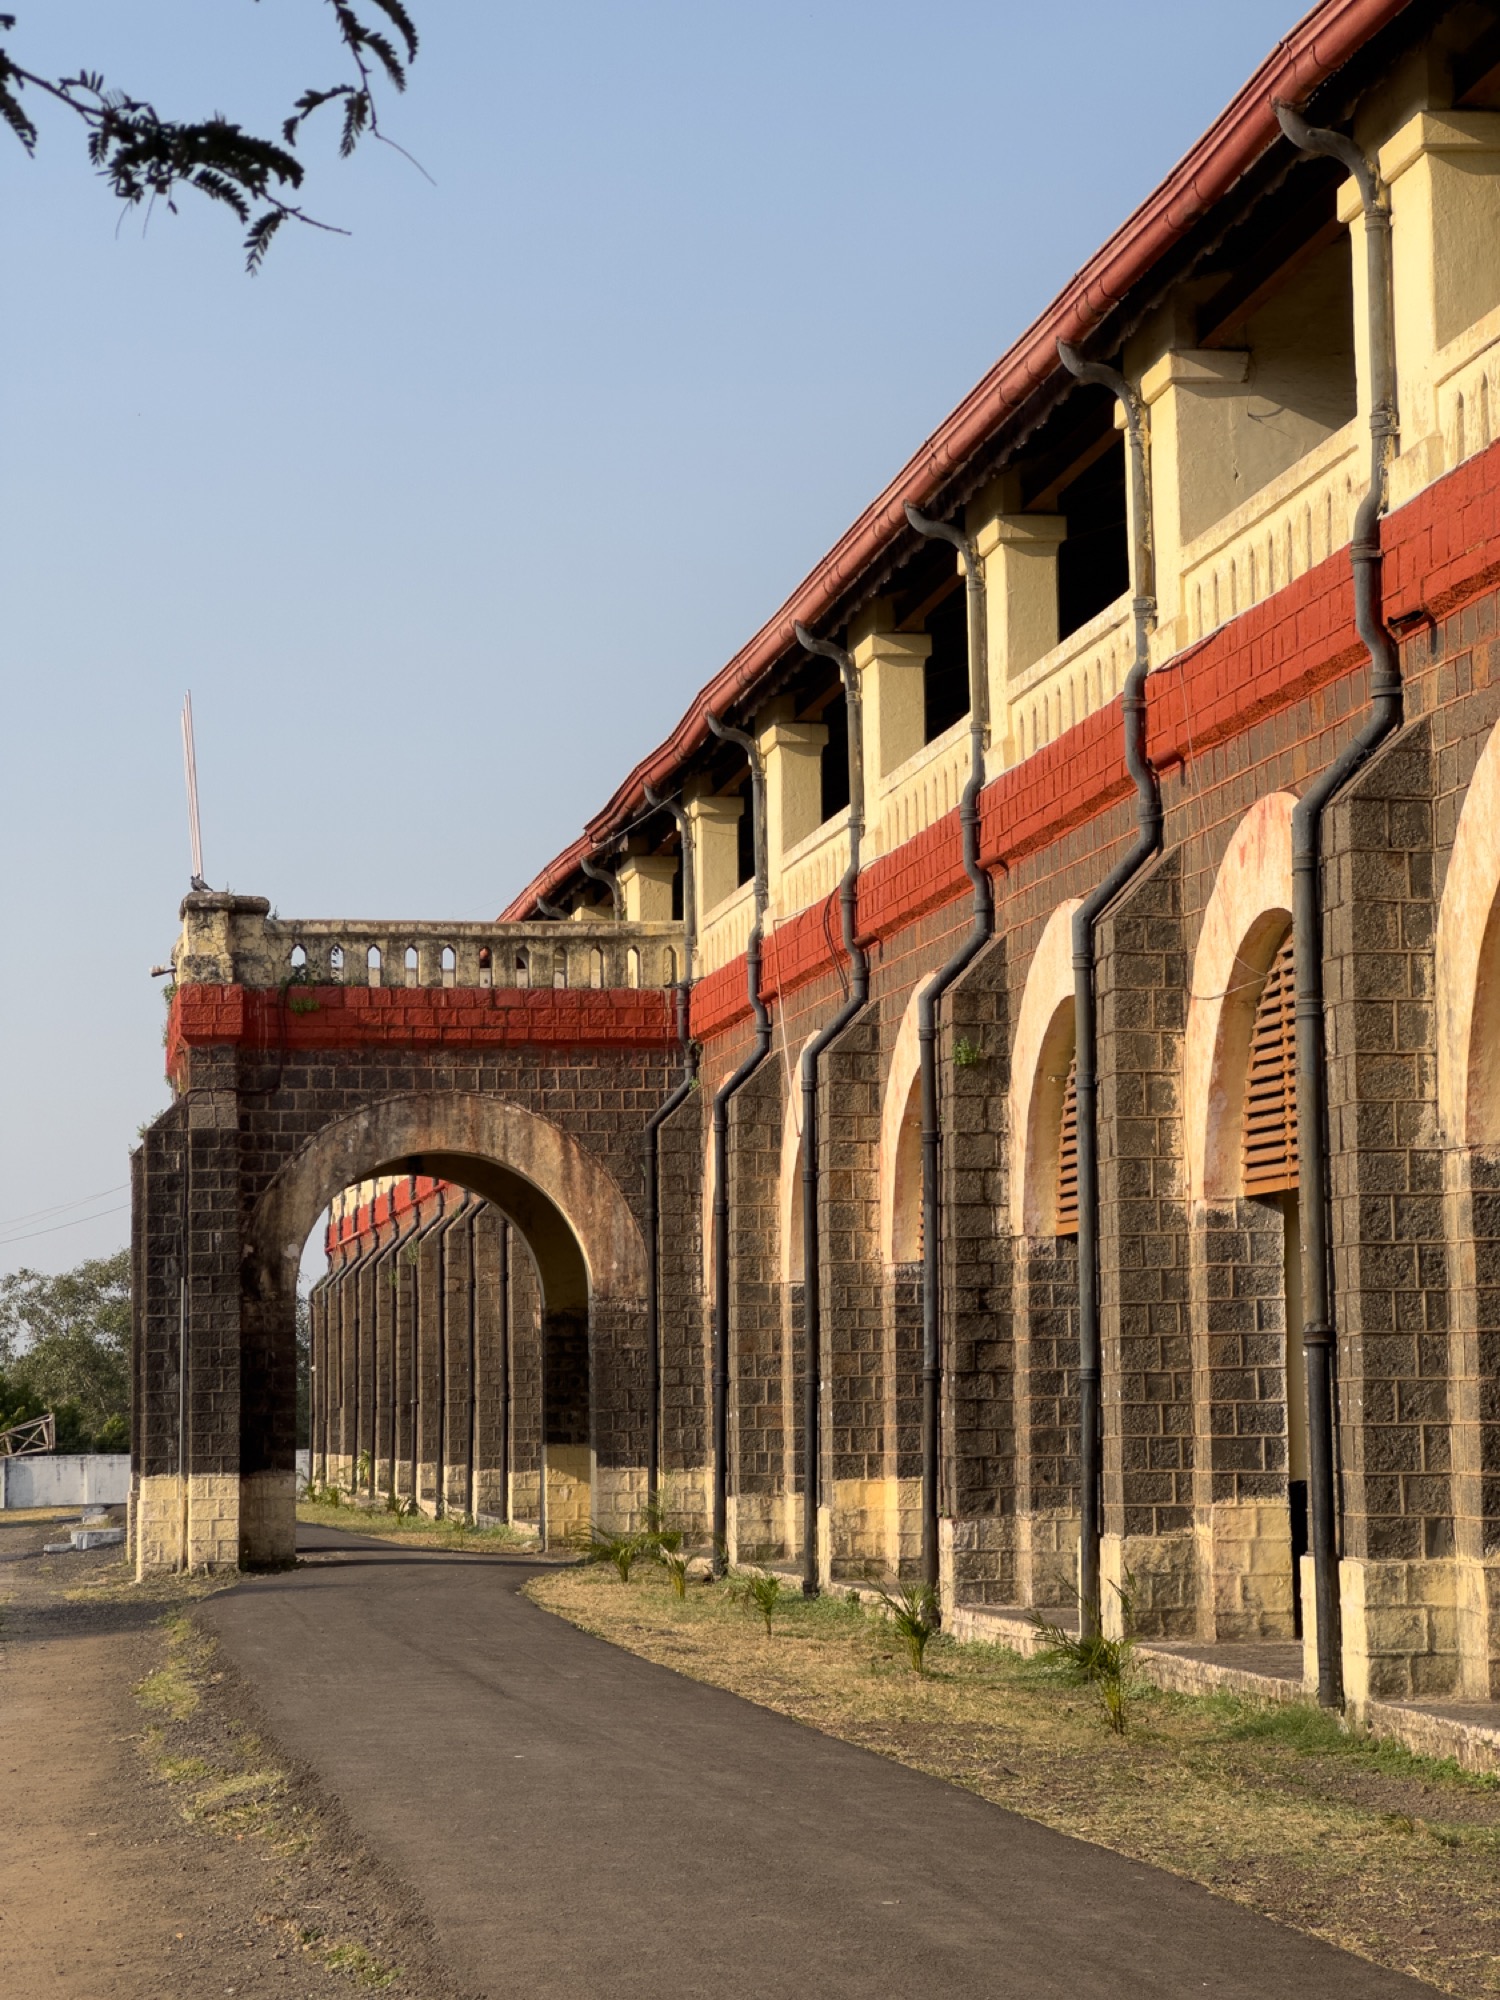 Heritage at risk: Outcry to stop demolition of a 157 year old Army Public School at MHOW 17